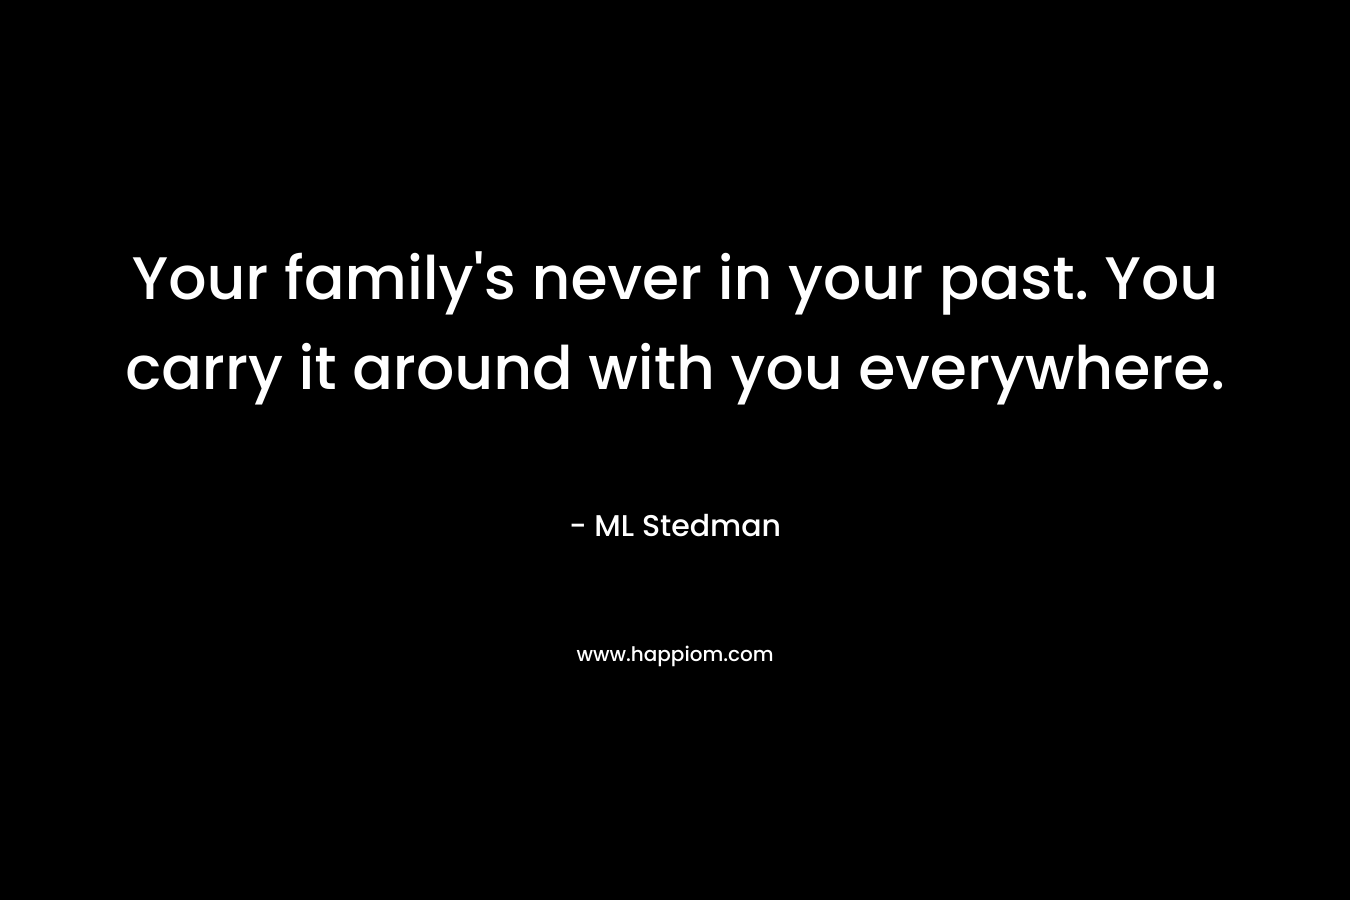 Your family's never in your past. You carry it around with you everywhere.